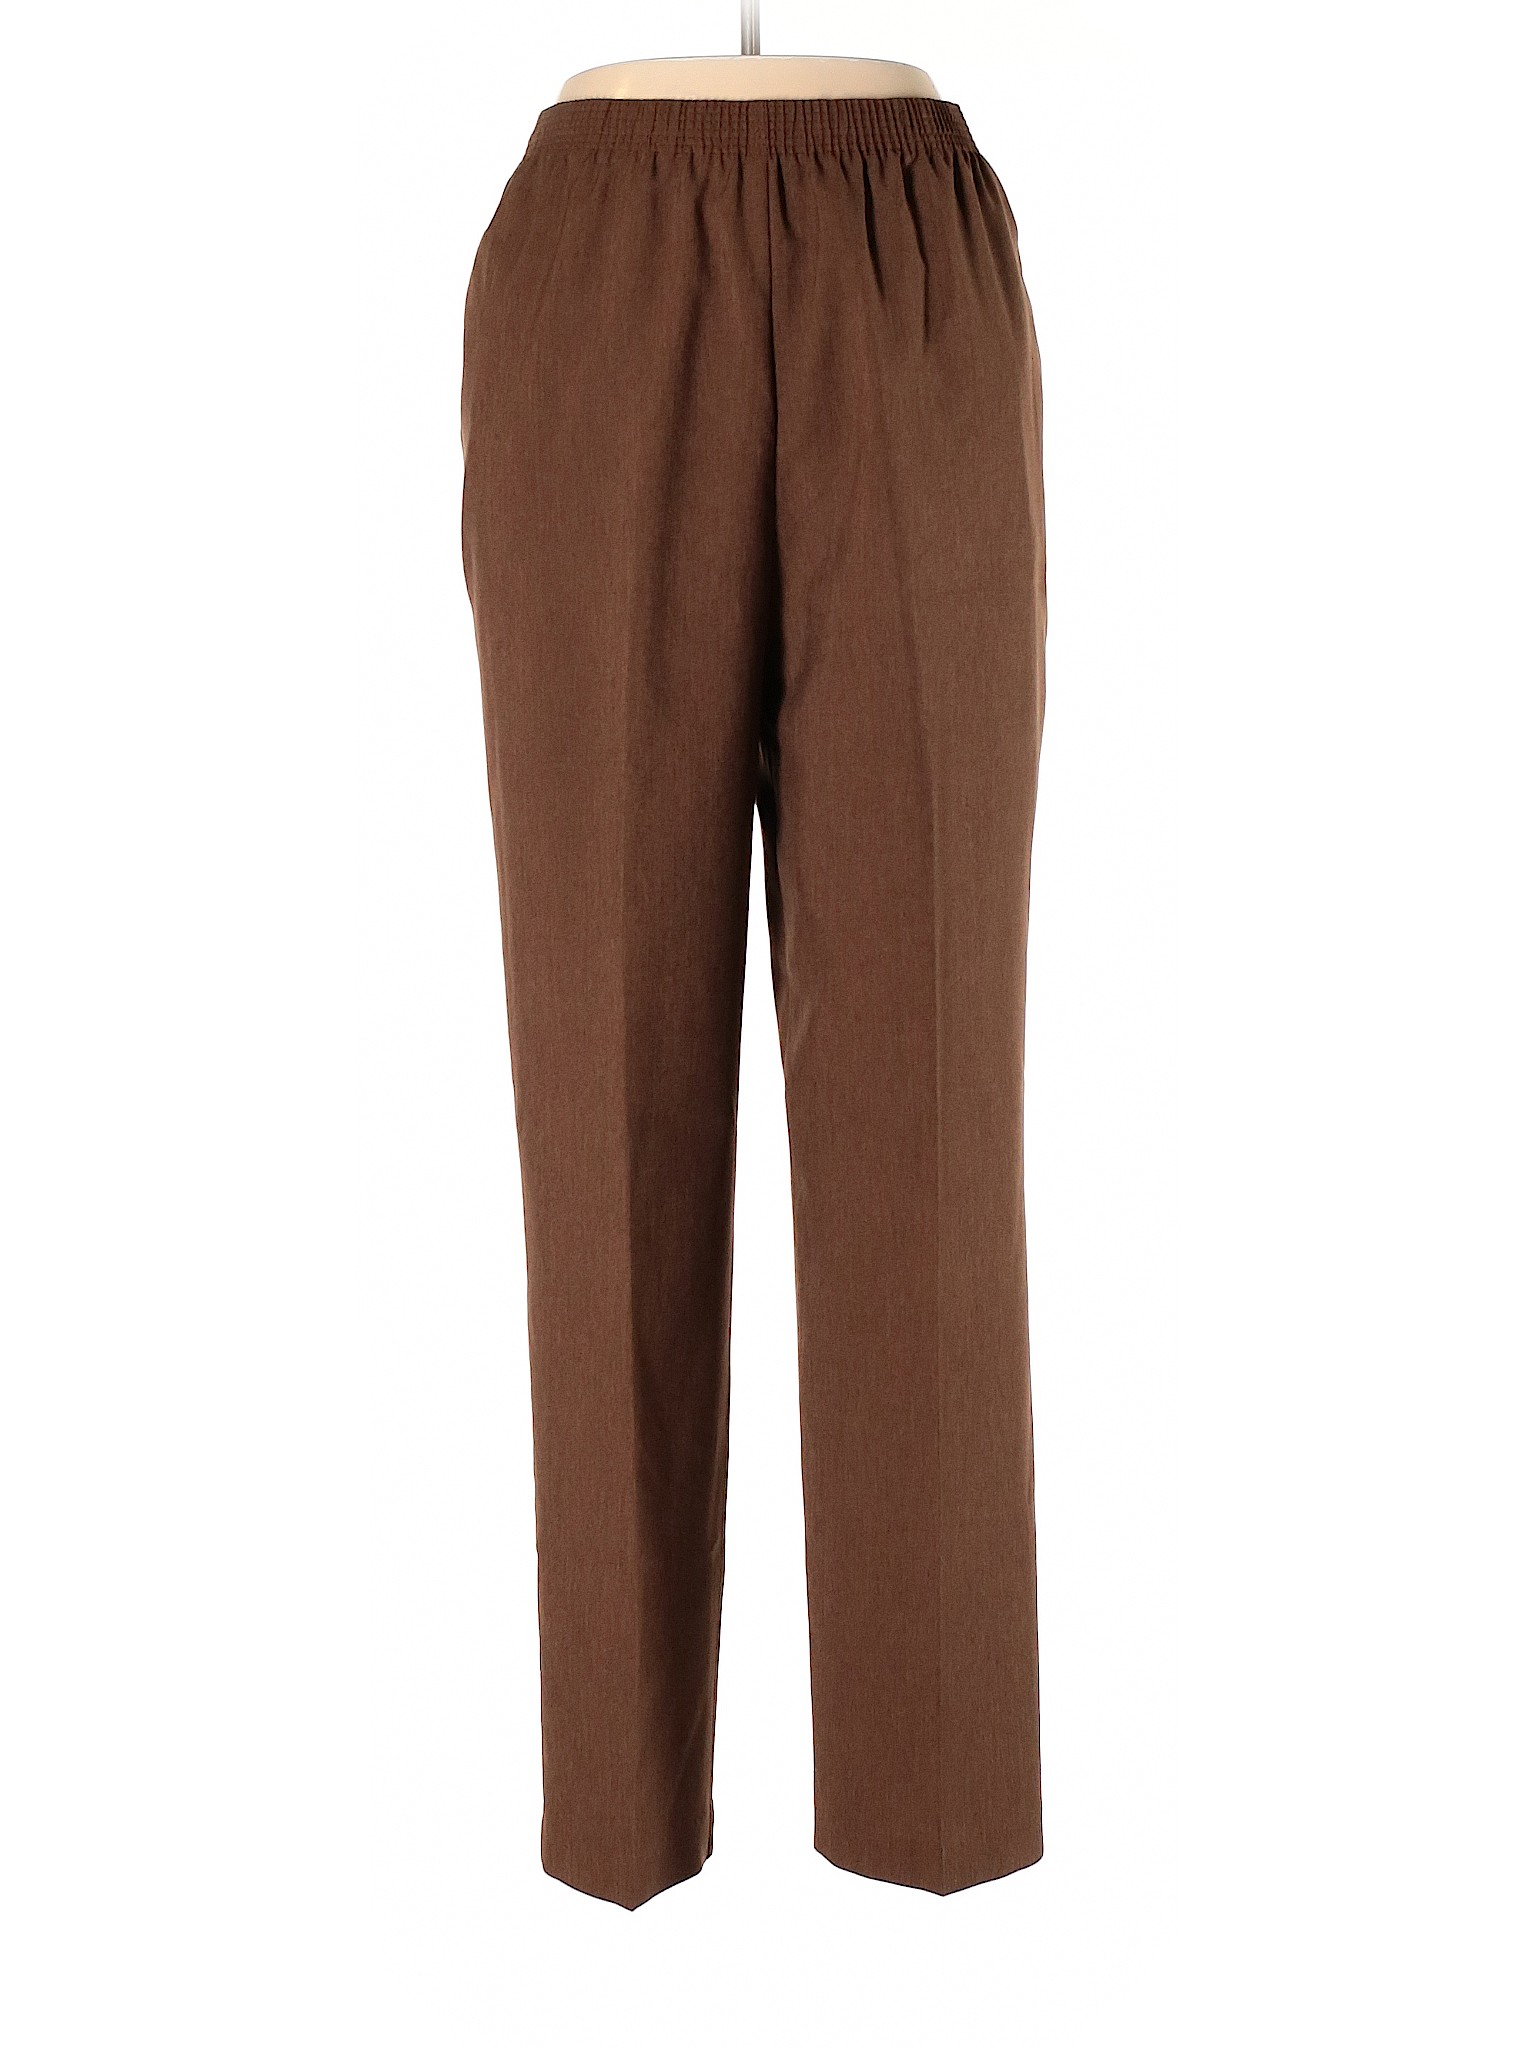 Allison Daley 100% Polyester Solid Brown Casual Pants Size 12 - 75% off ...